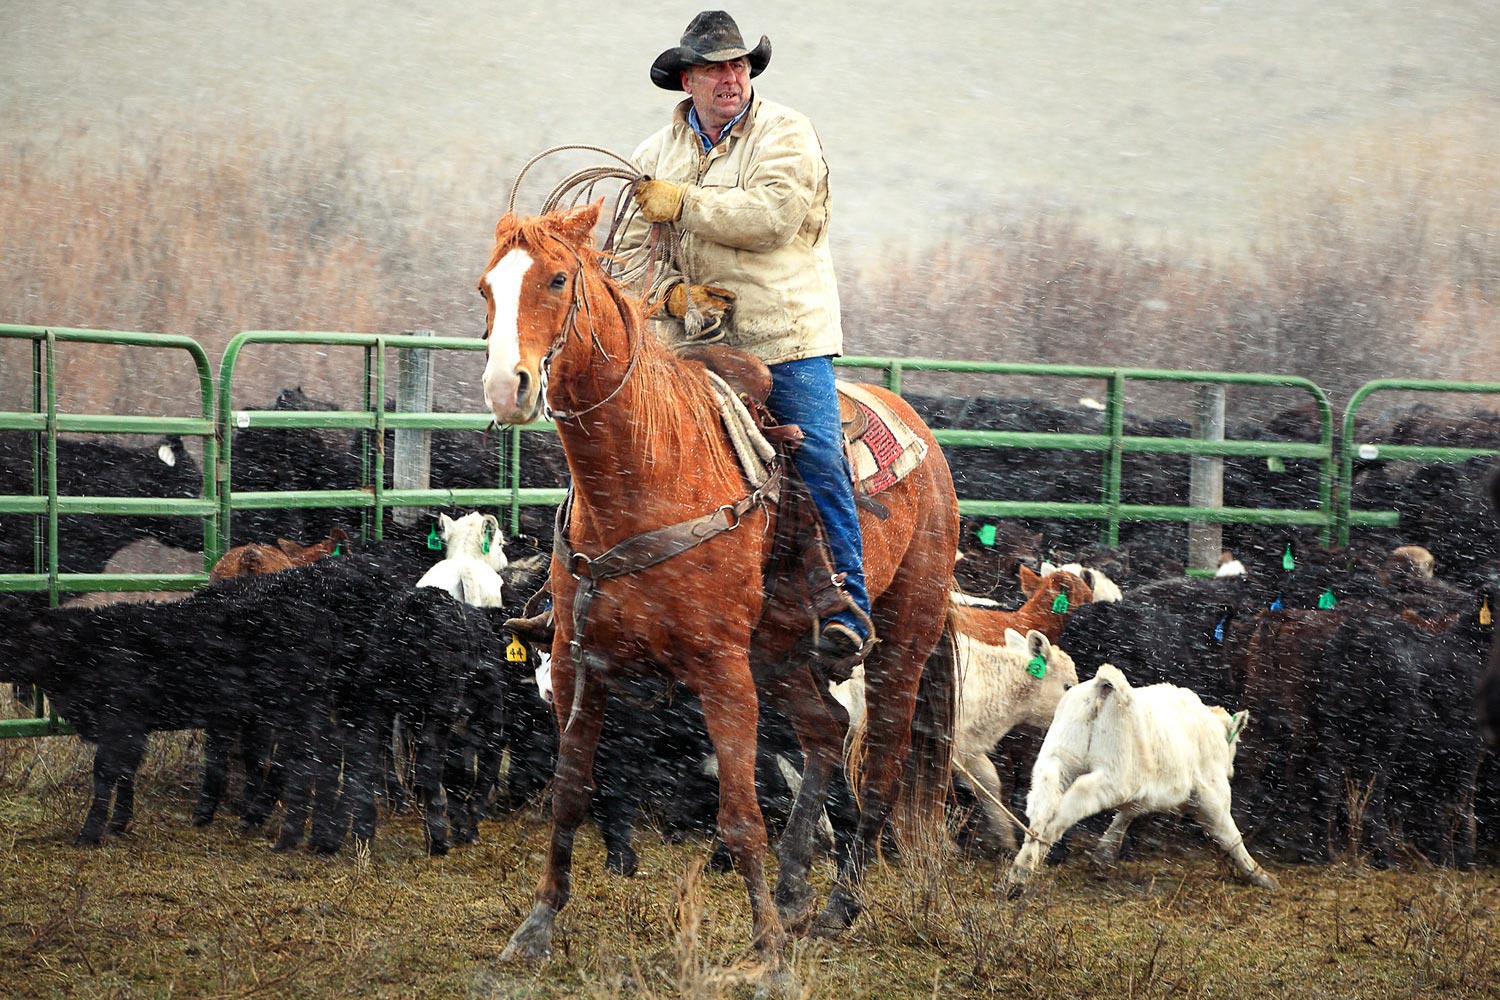 Cowboy-Photos-of-Men-Roping-Cattle-on-Ranch